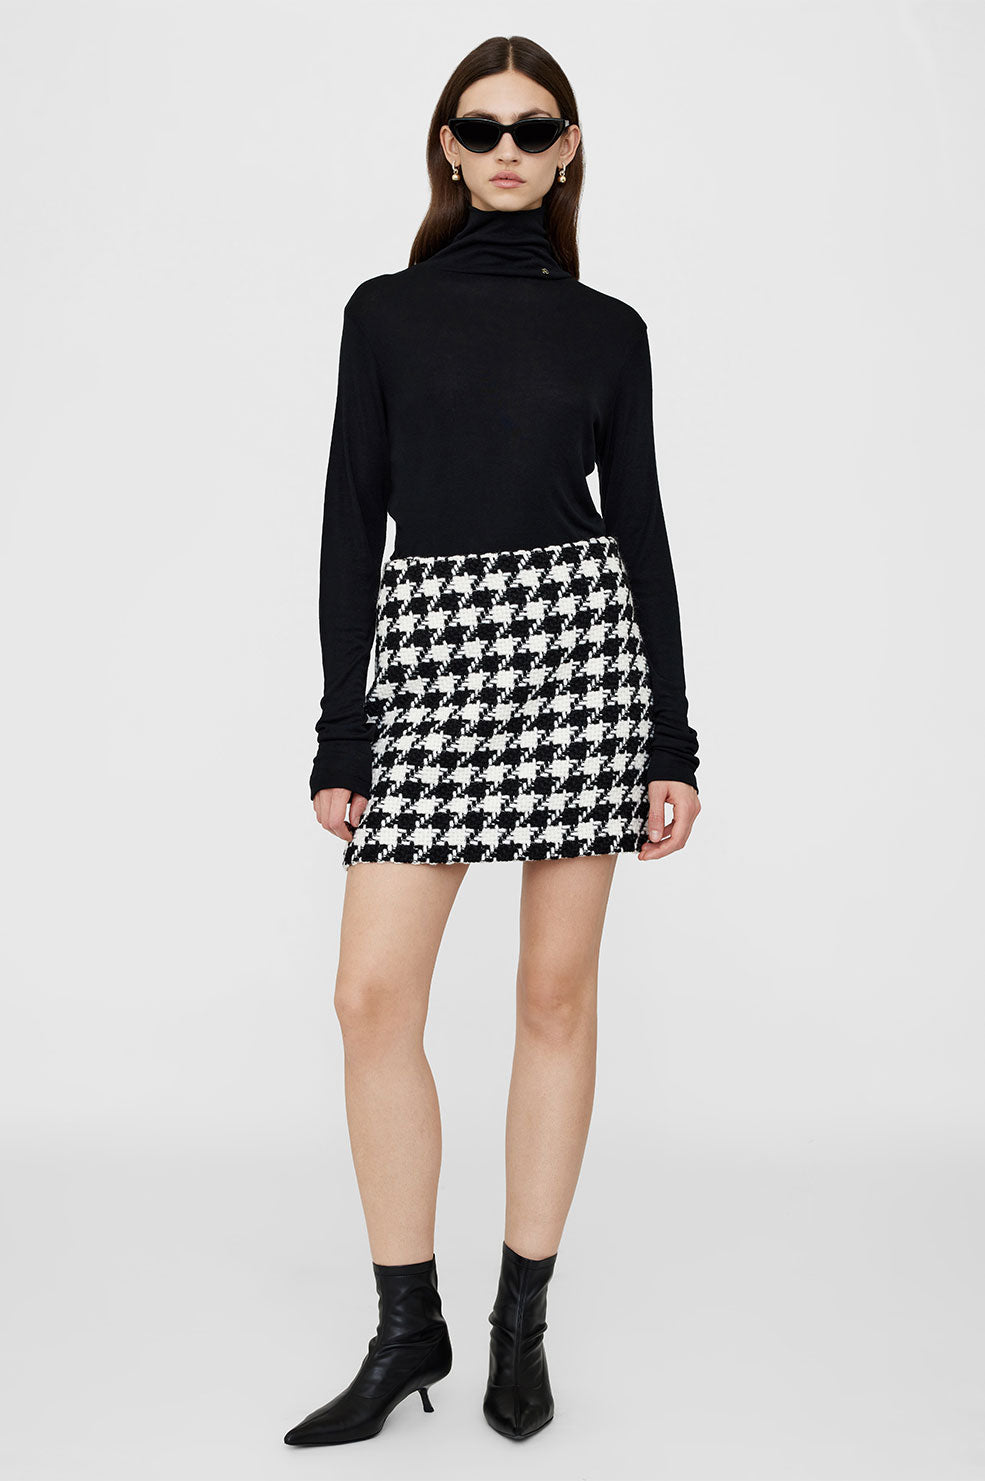 ANINE BING Ada Skirt - Black And White Houndstooth - On Model Front